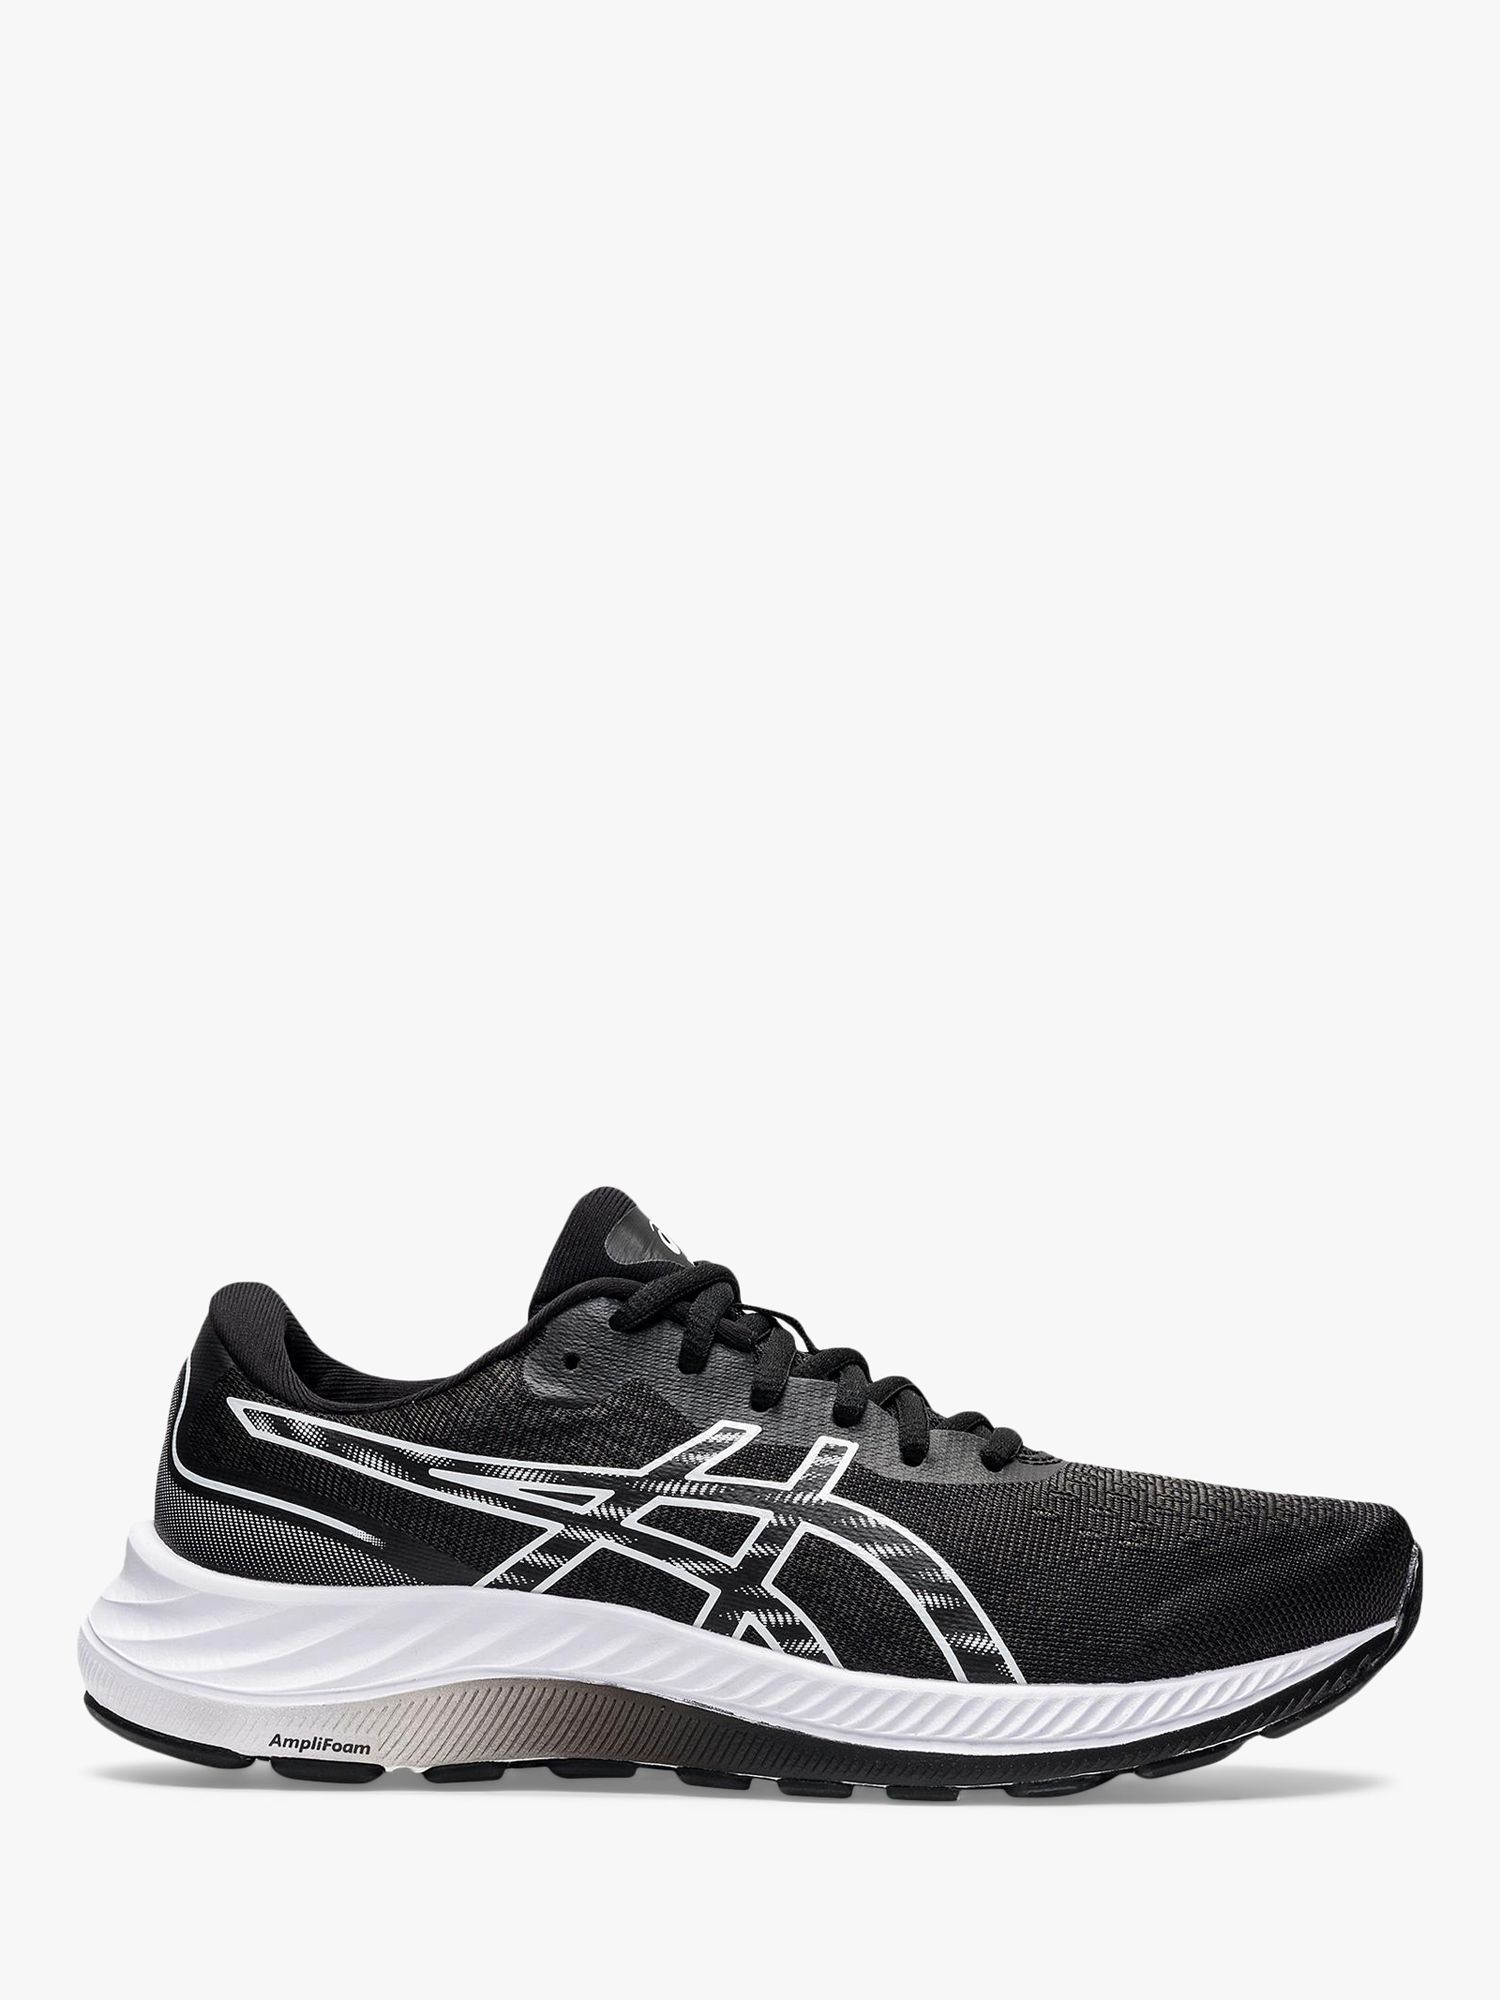 Más que nada invernadero Crítico ASICS GEL-EXCITE 9 Women's Running Shoes, Black/White at John Lewis &  Partners